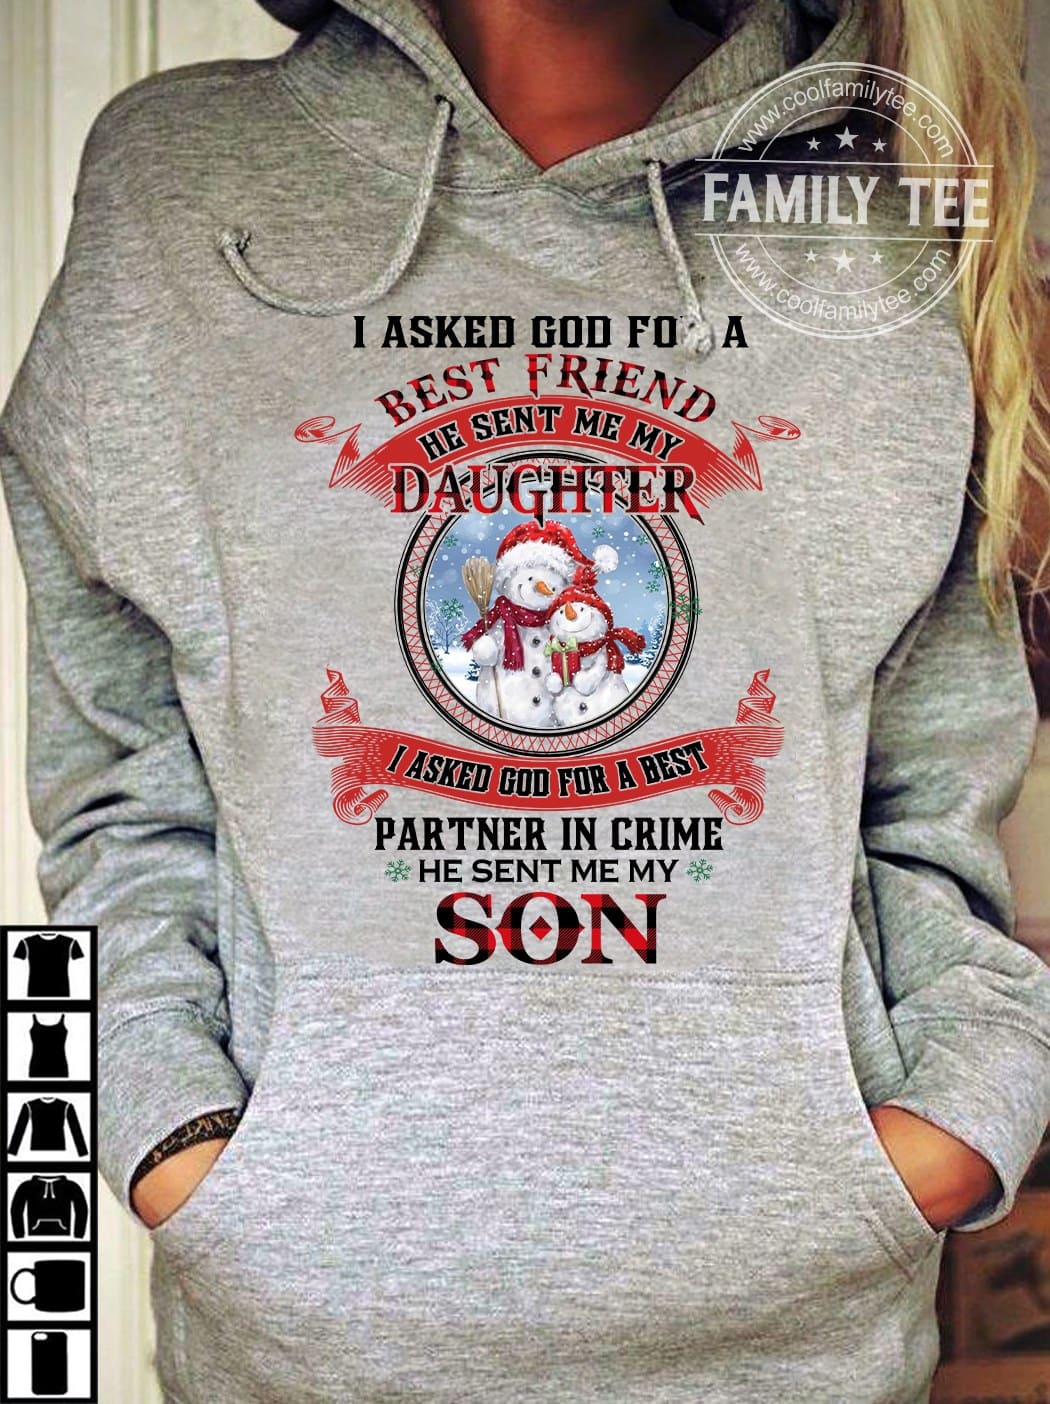 I asked god for a best friend he sent me my daughter - Christmas snowman graphic T-shirt, daughter and son